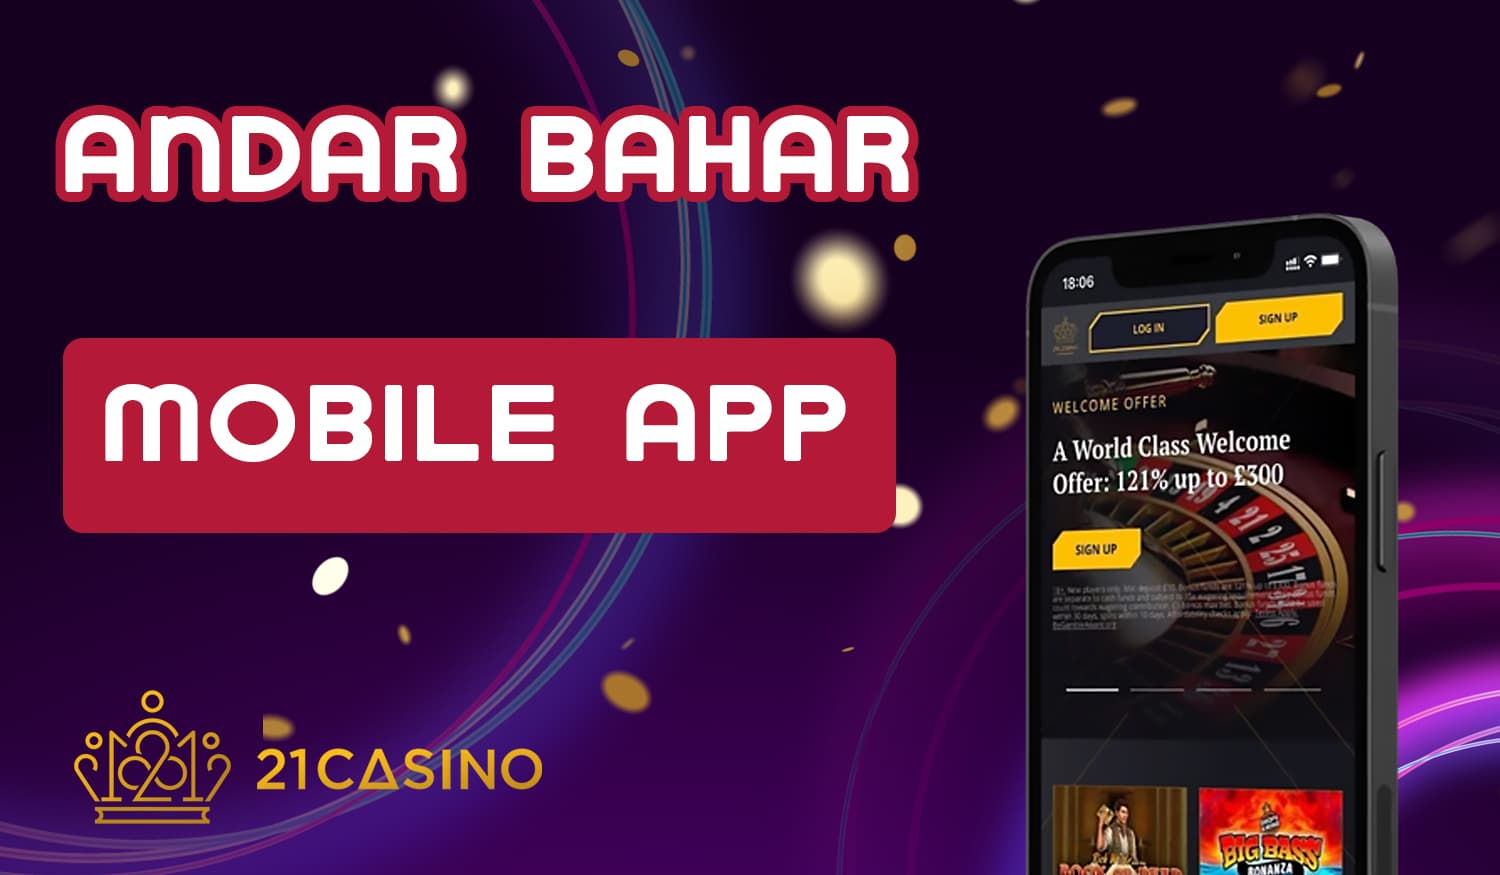 How to download and install 21 Casino's mobile app to play Andar Bahar